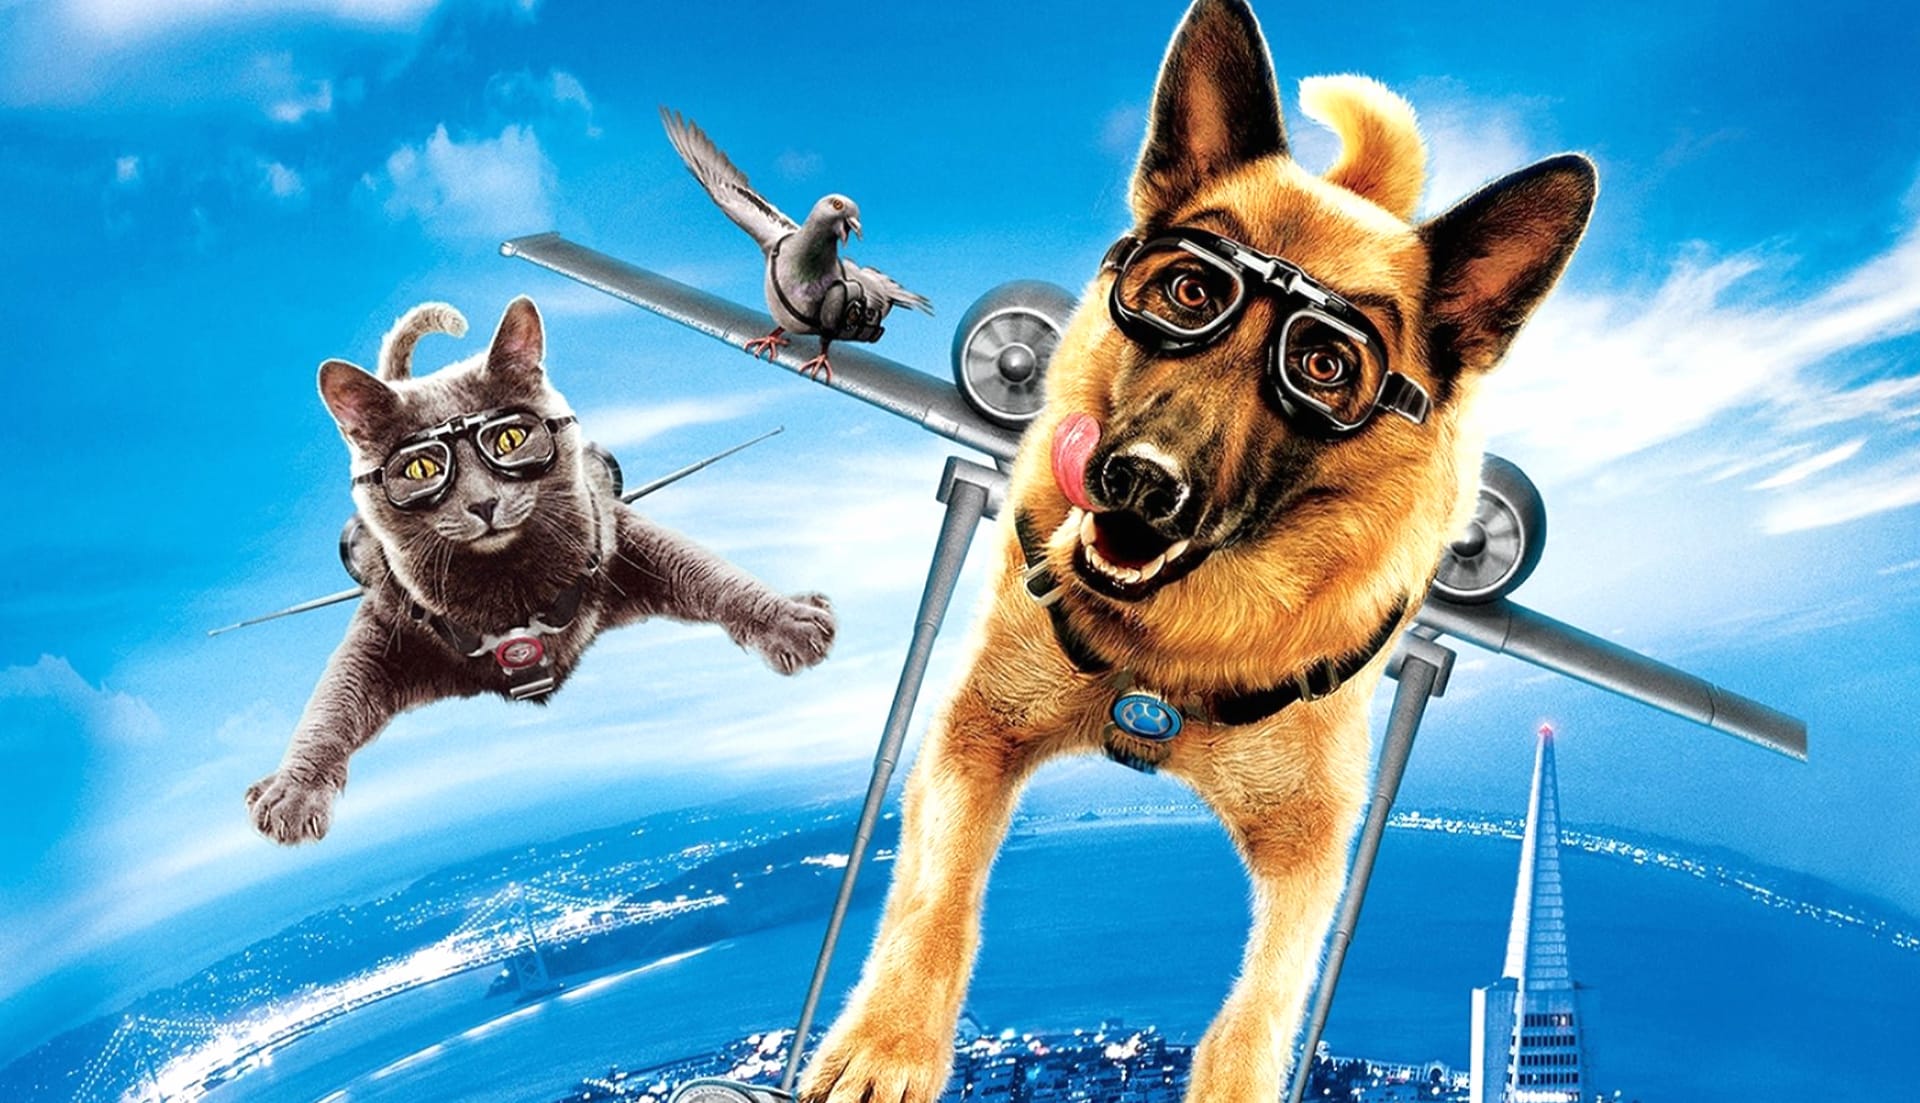 Cats Dogs The Revenge Of Kitty Galore wallpapers HD quality